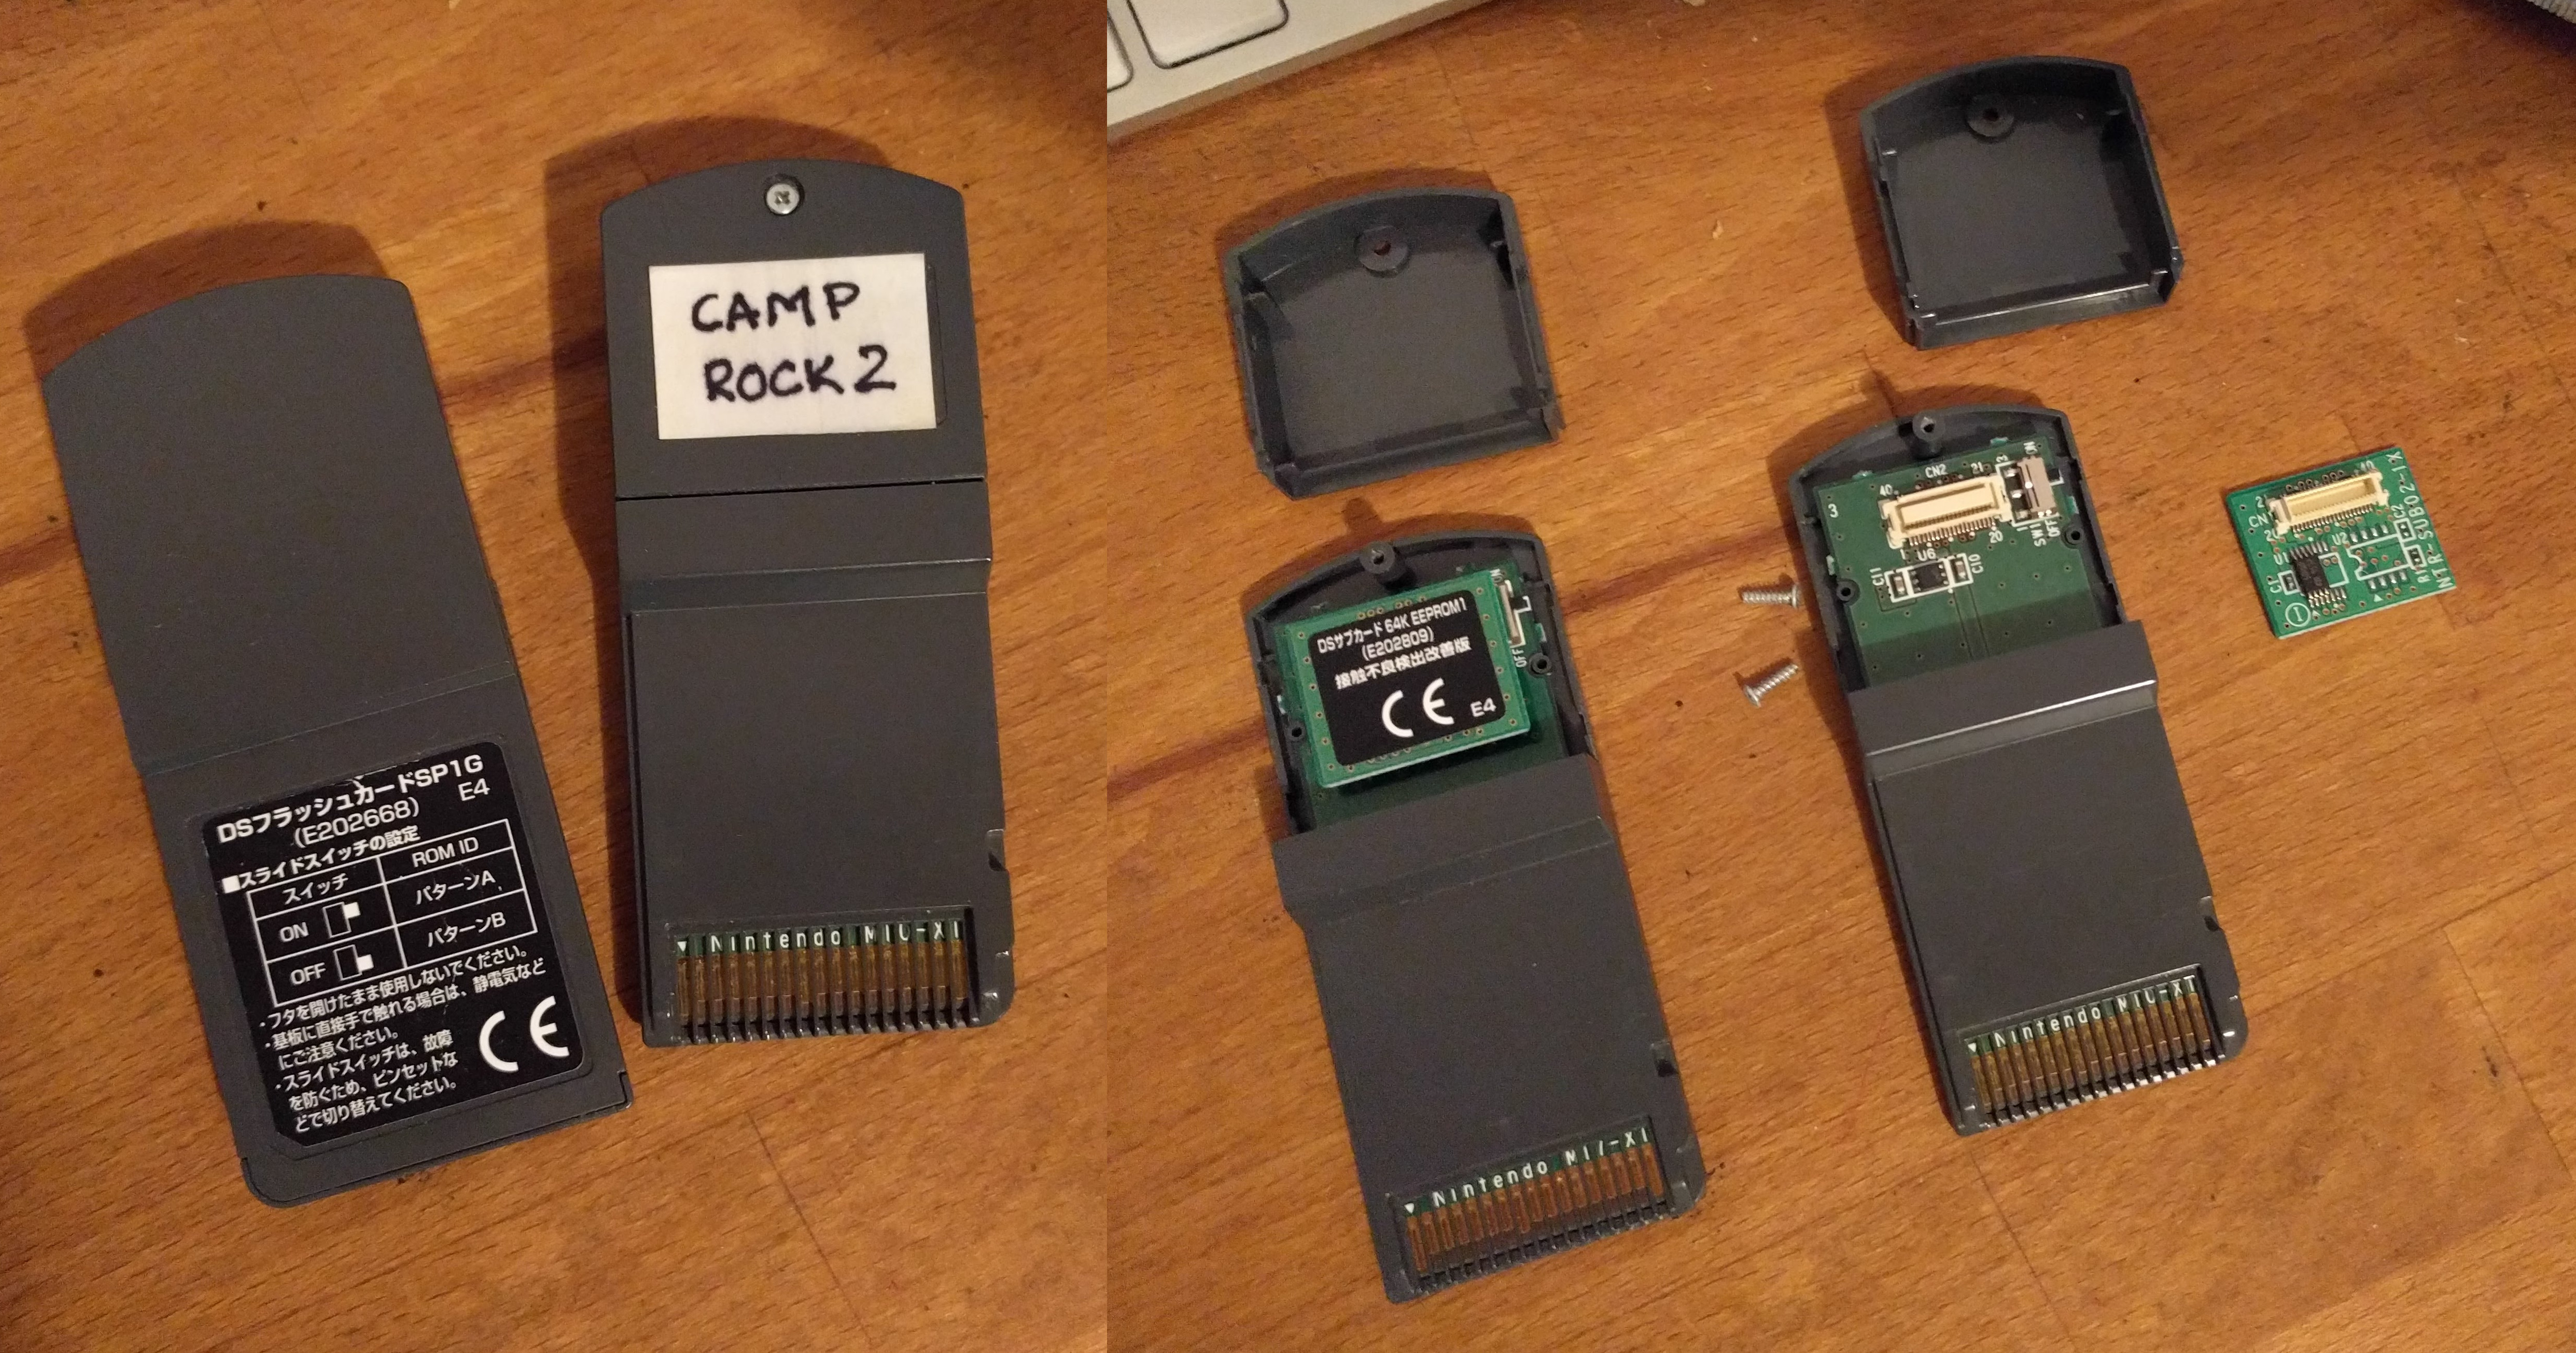 nintendo switch hacked game card